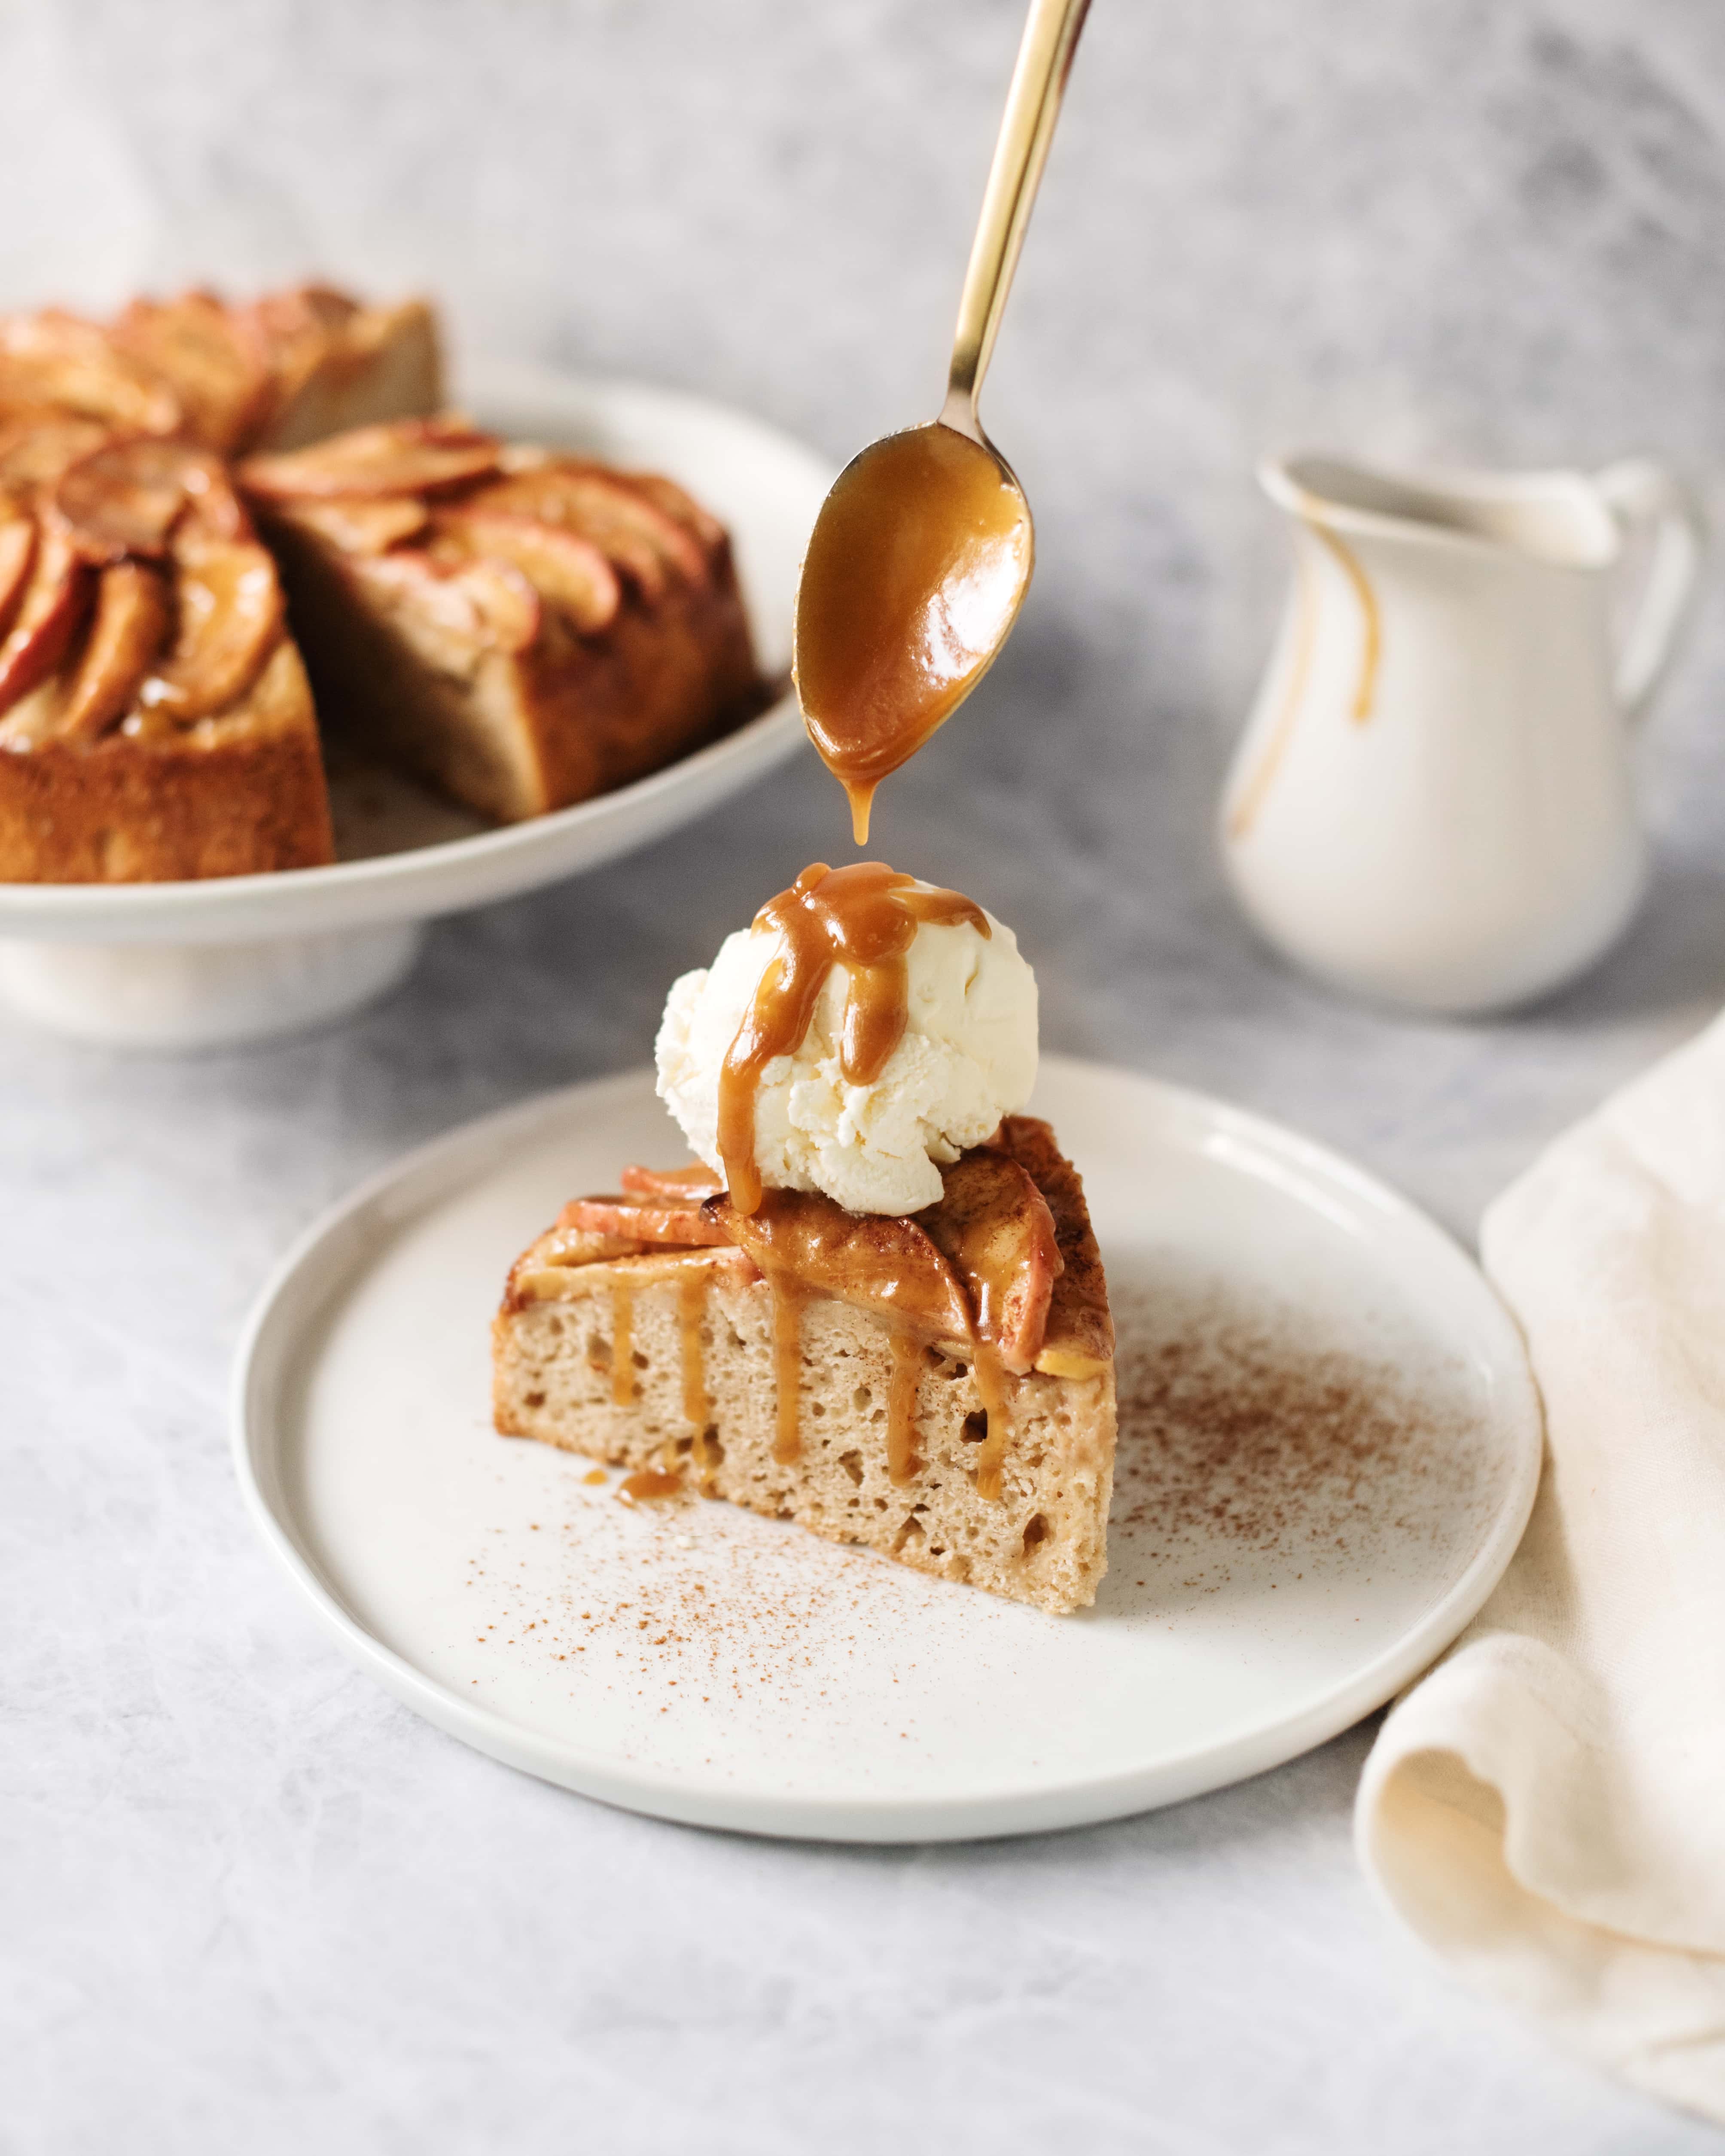 A slice of apple cake topped with a scoop of vanilla ice cream and drizzled with salted maple caramel from a spoon